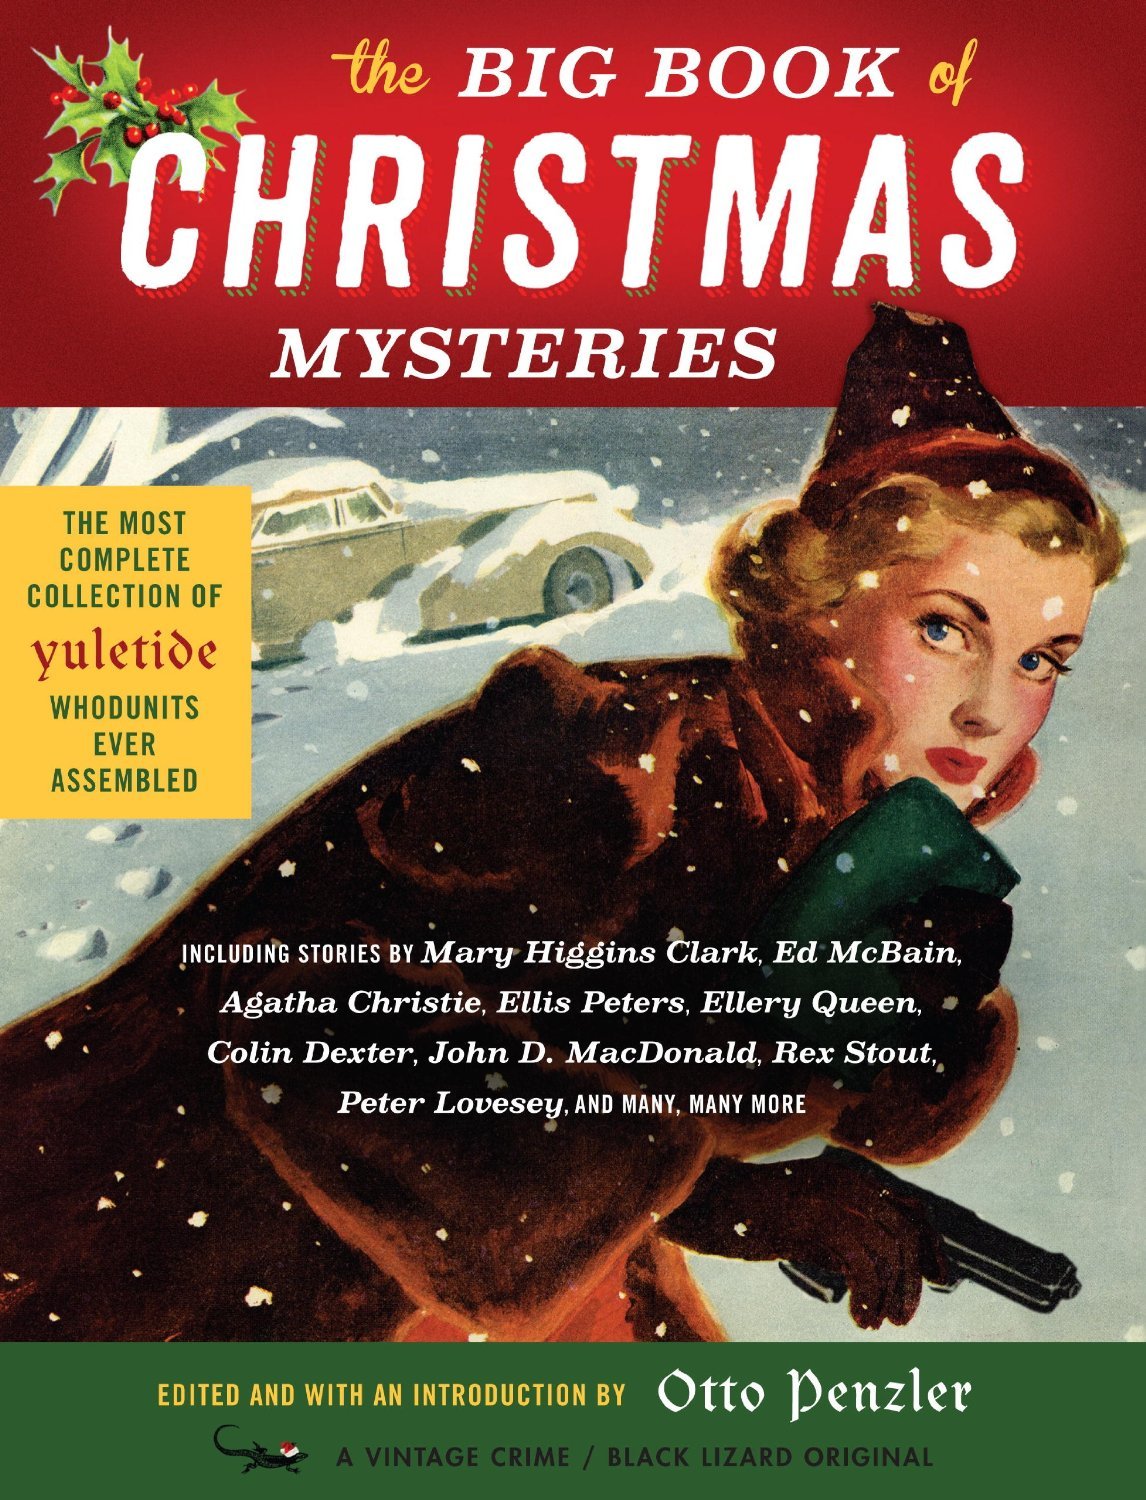 REVIEW: THE BIG BOOK OF CHRISTMAS MYSTERIES